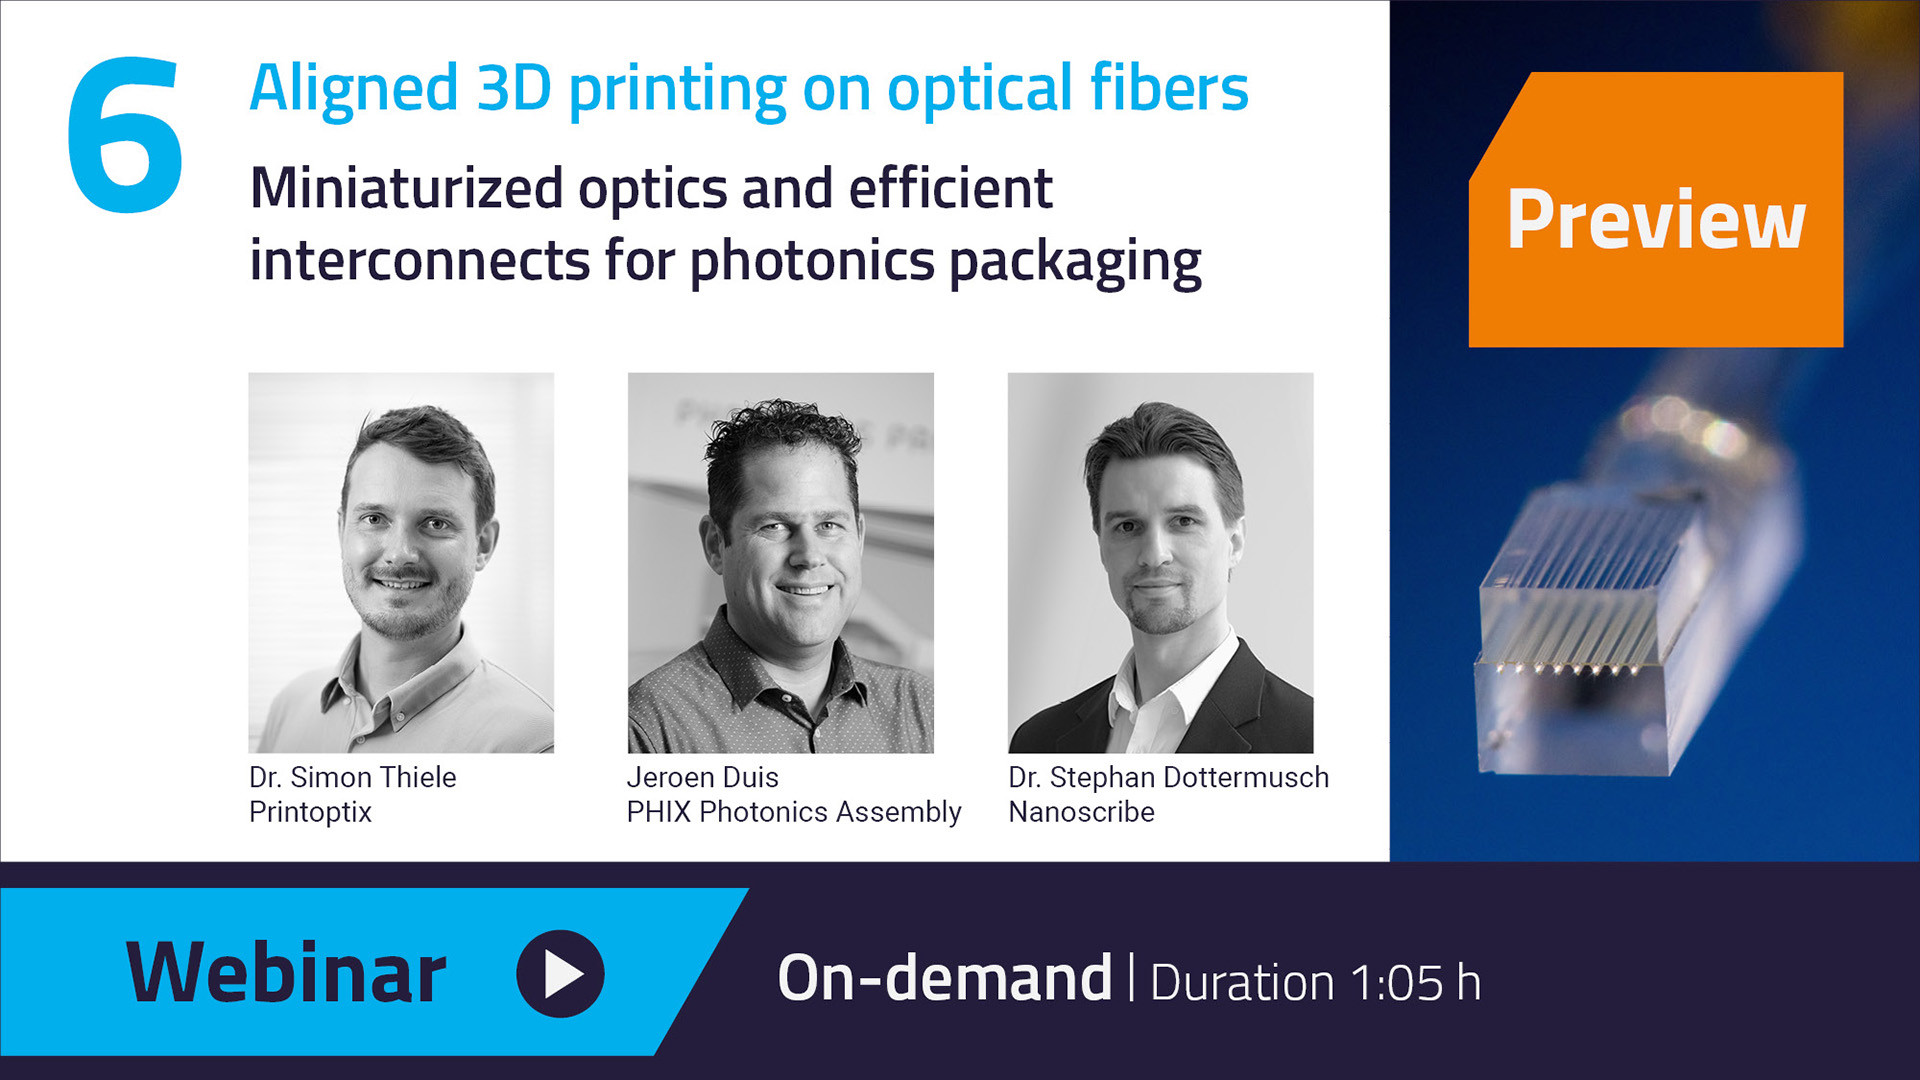 Our Webinar on Aligned 3D printing on optical fibers is now available on-demand - watch the webinar here